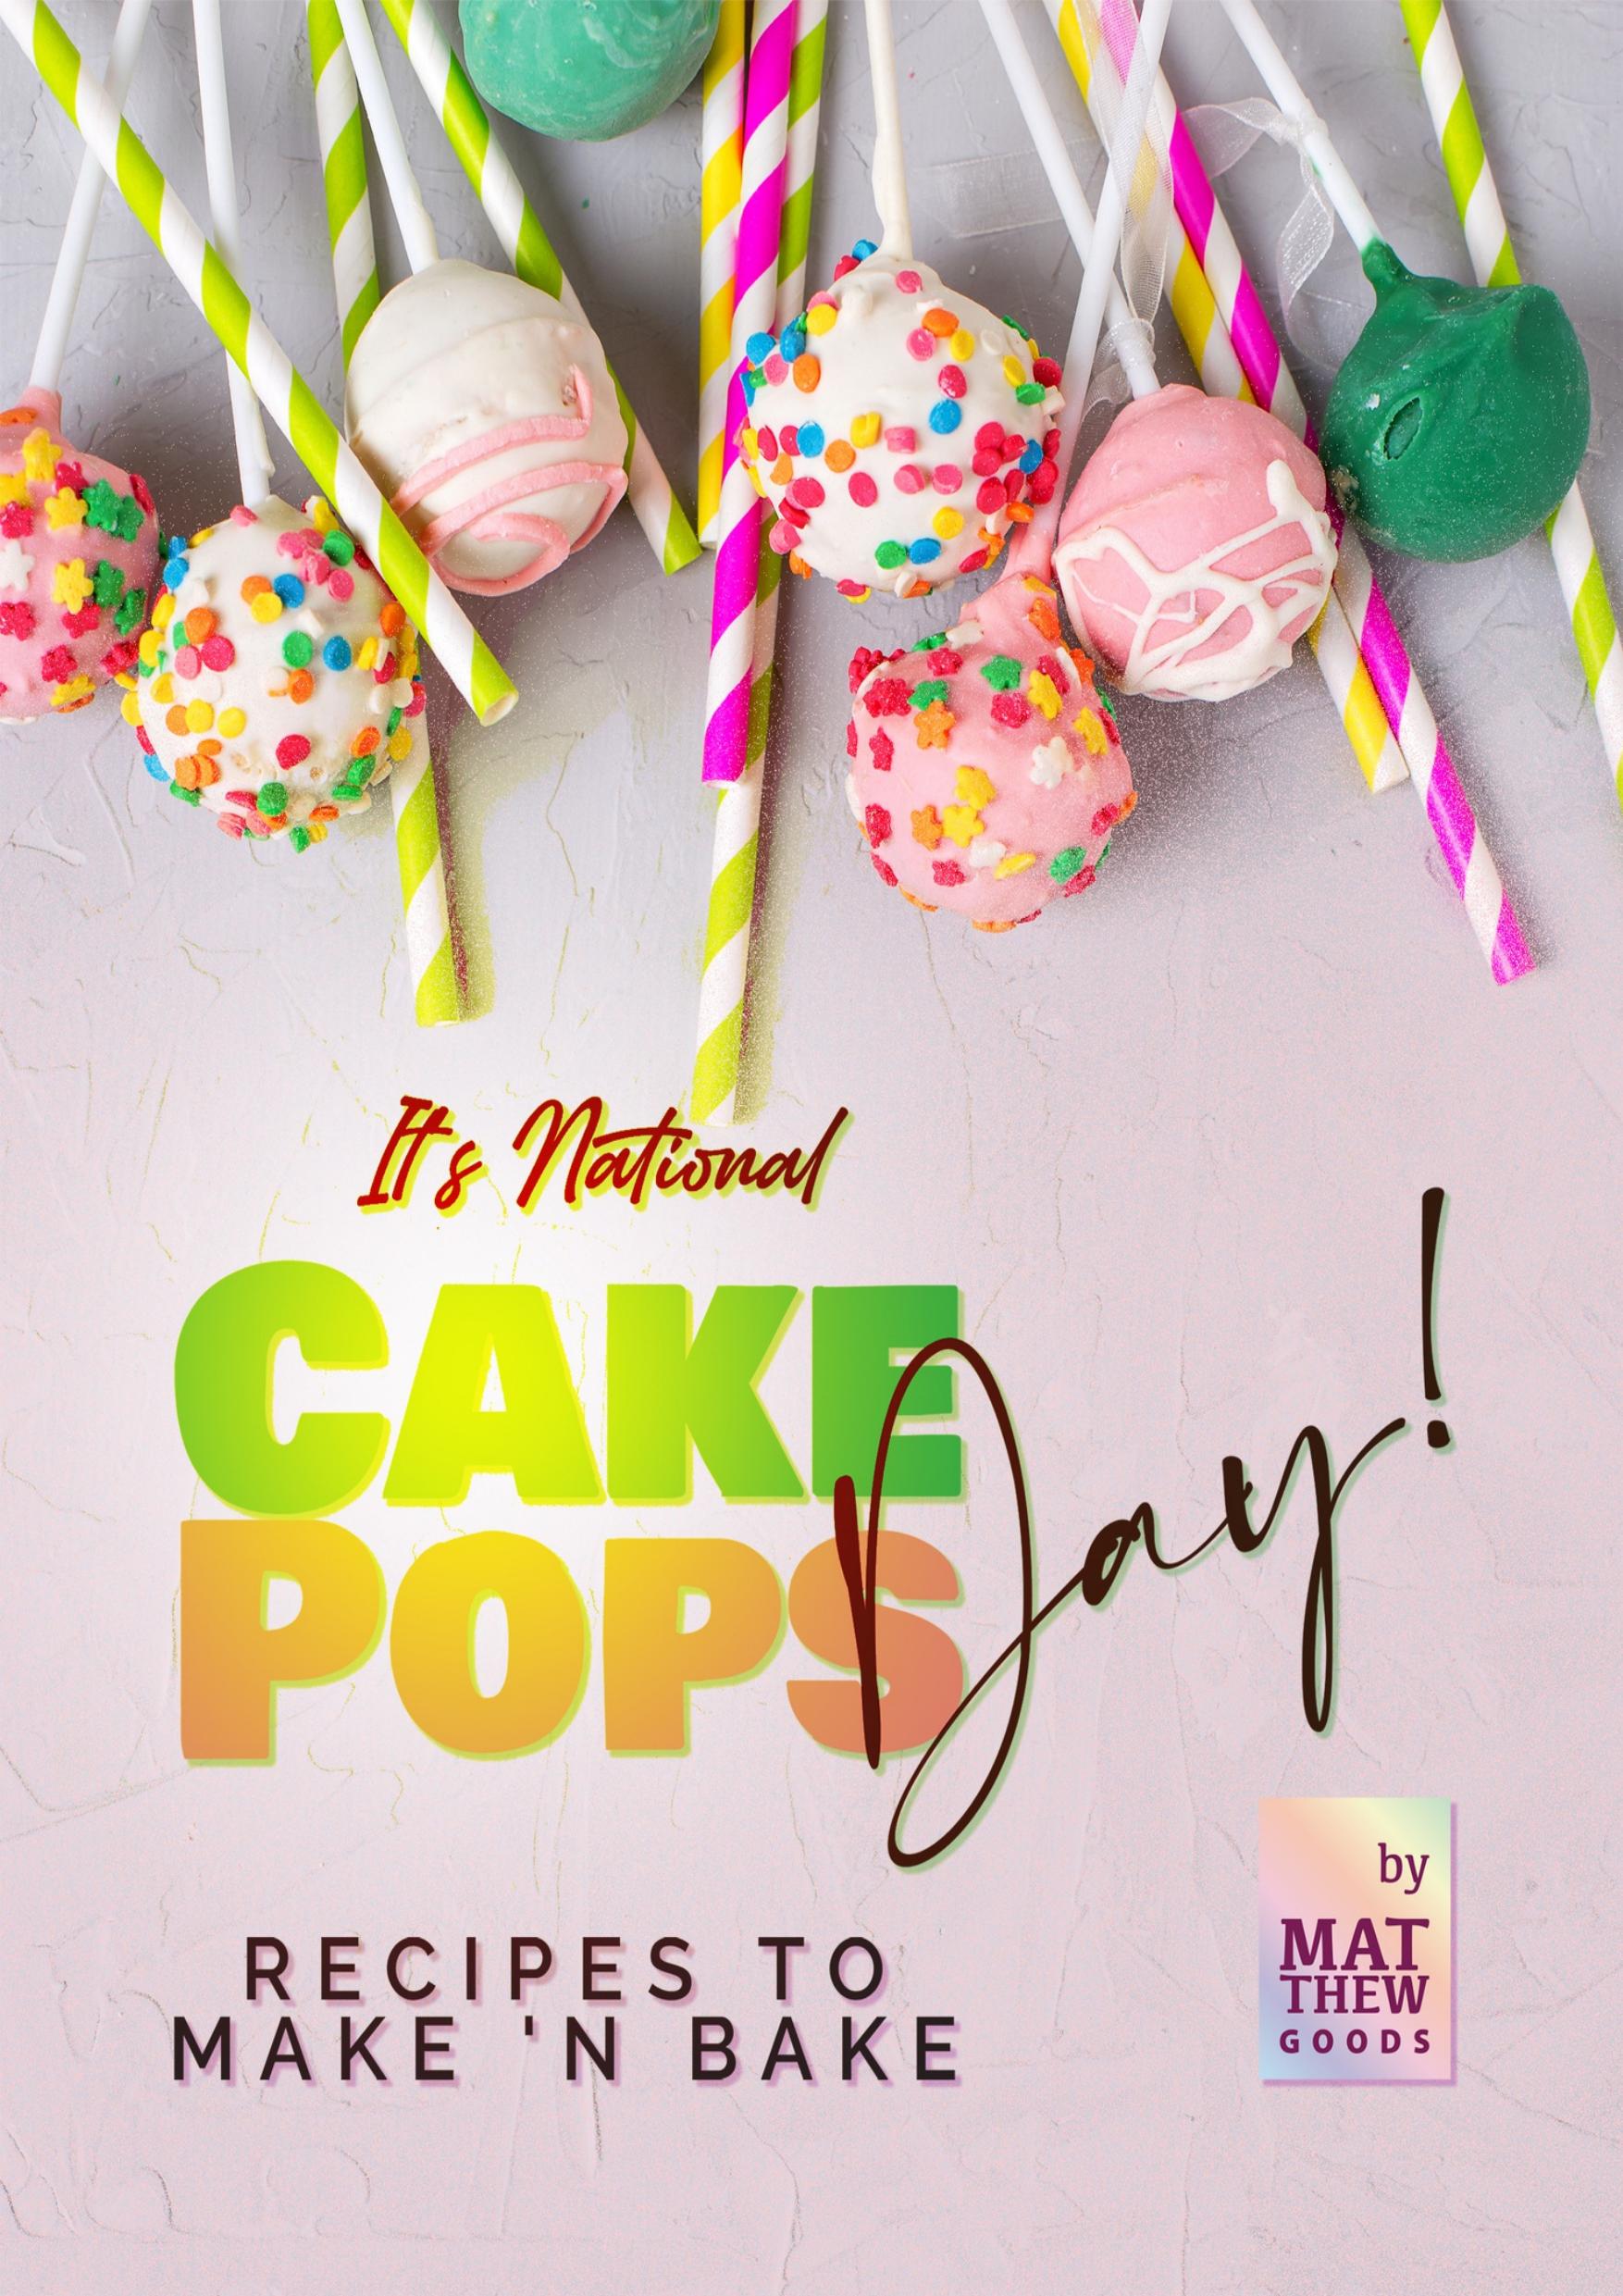 It's National Cake Pops Day!: Recipes to Make 'n Bake by Goods Matthew